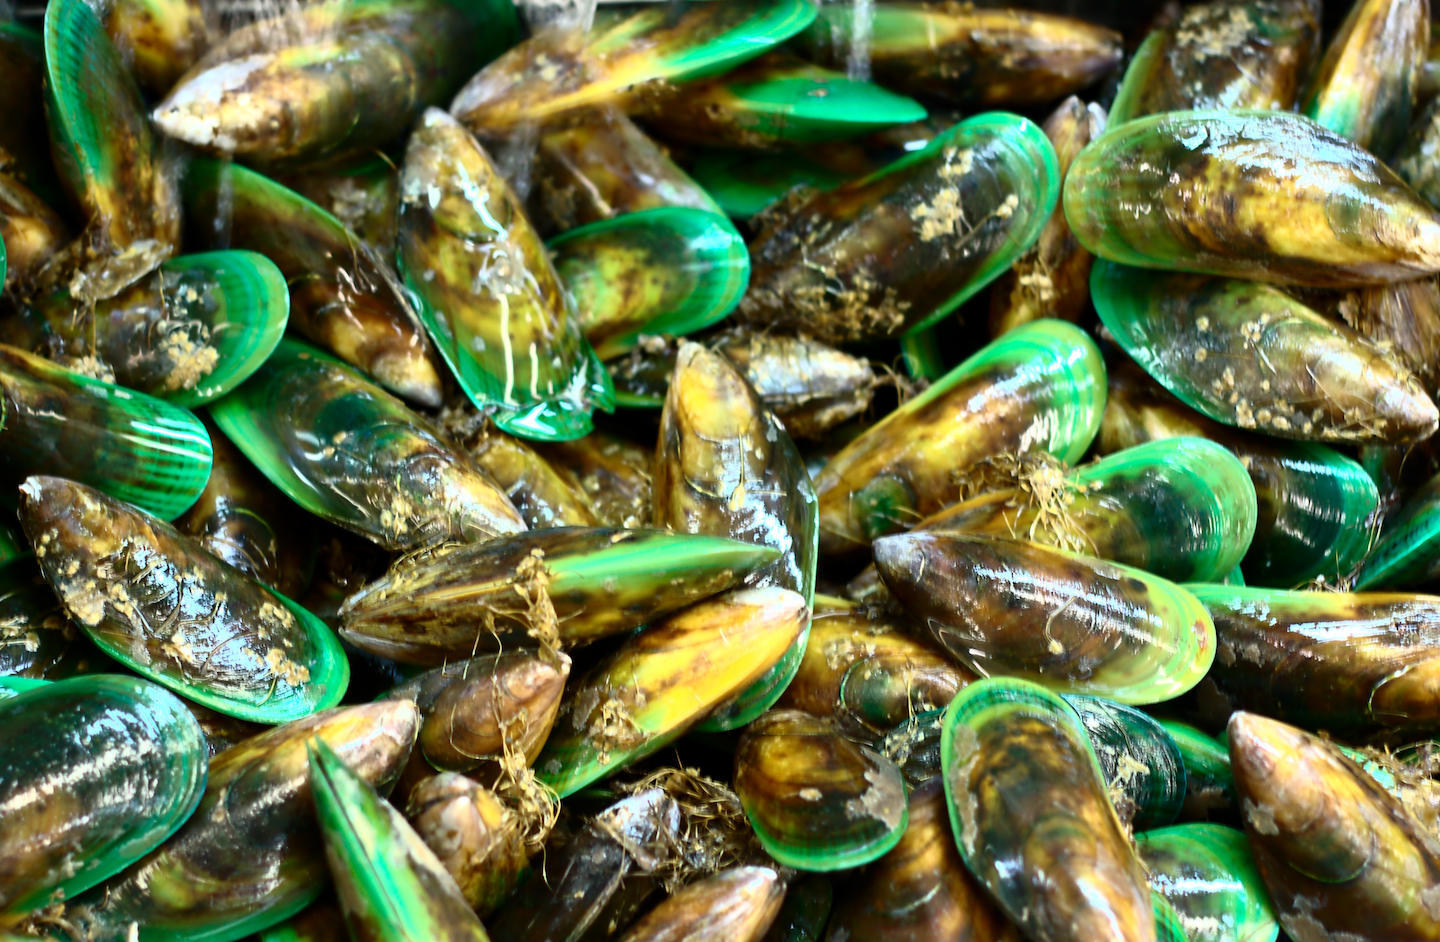 A picture of mussels